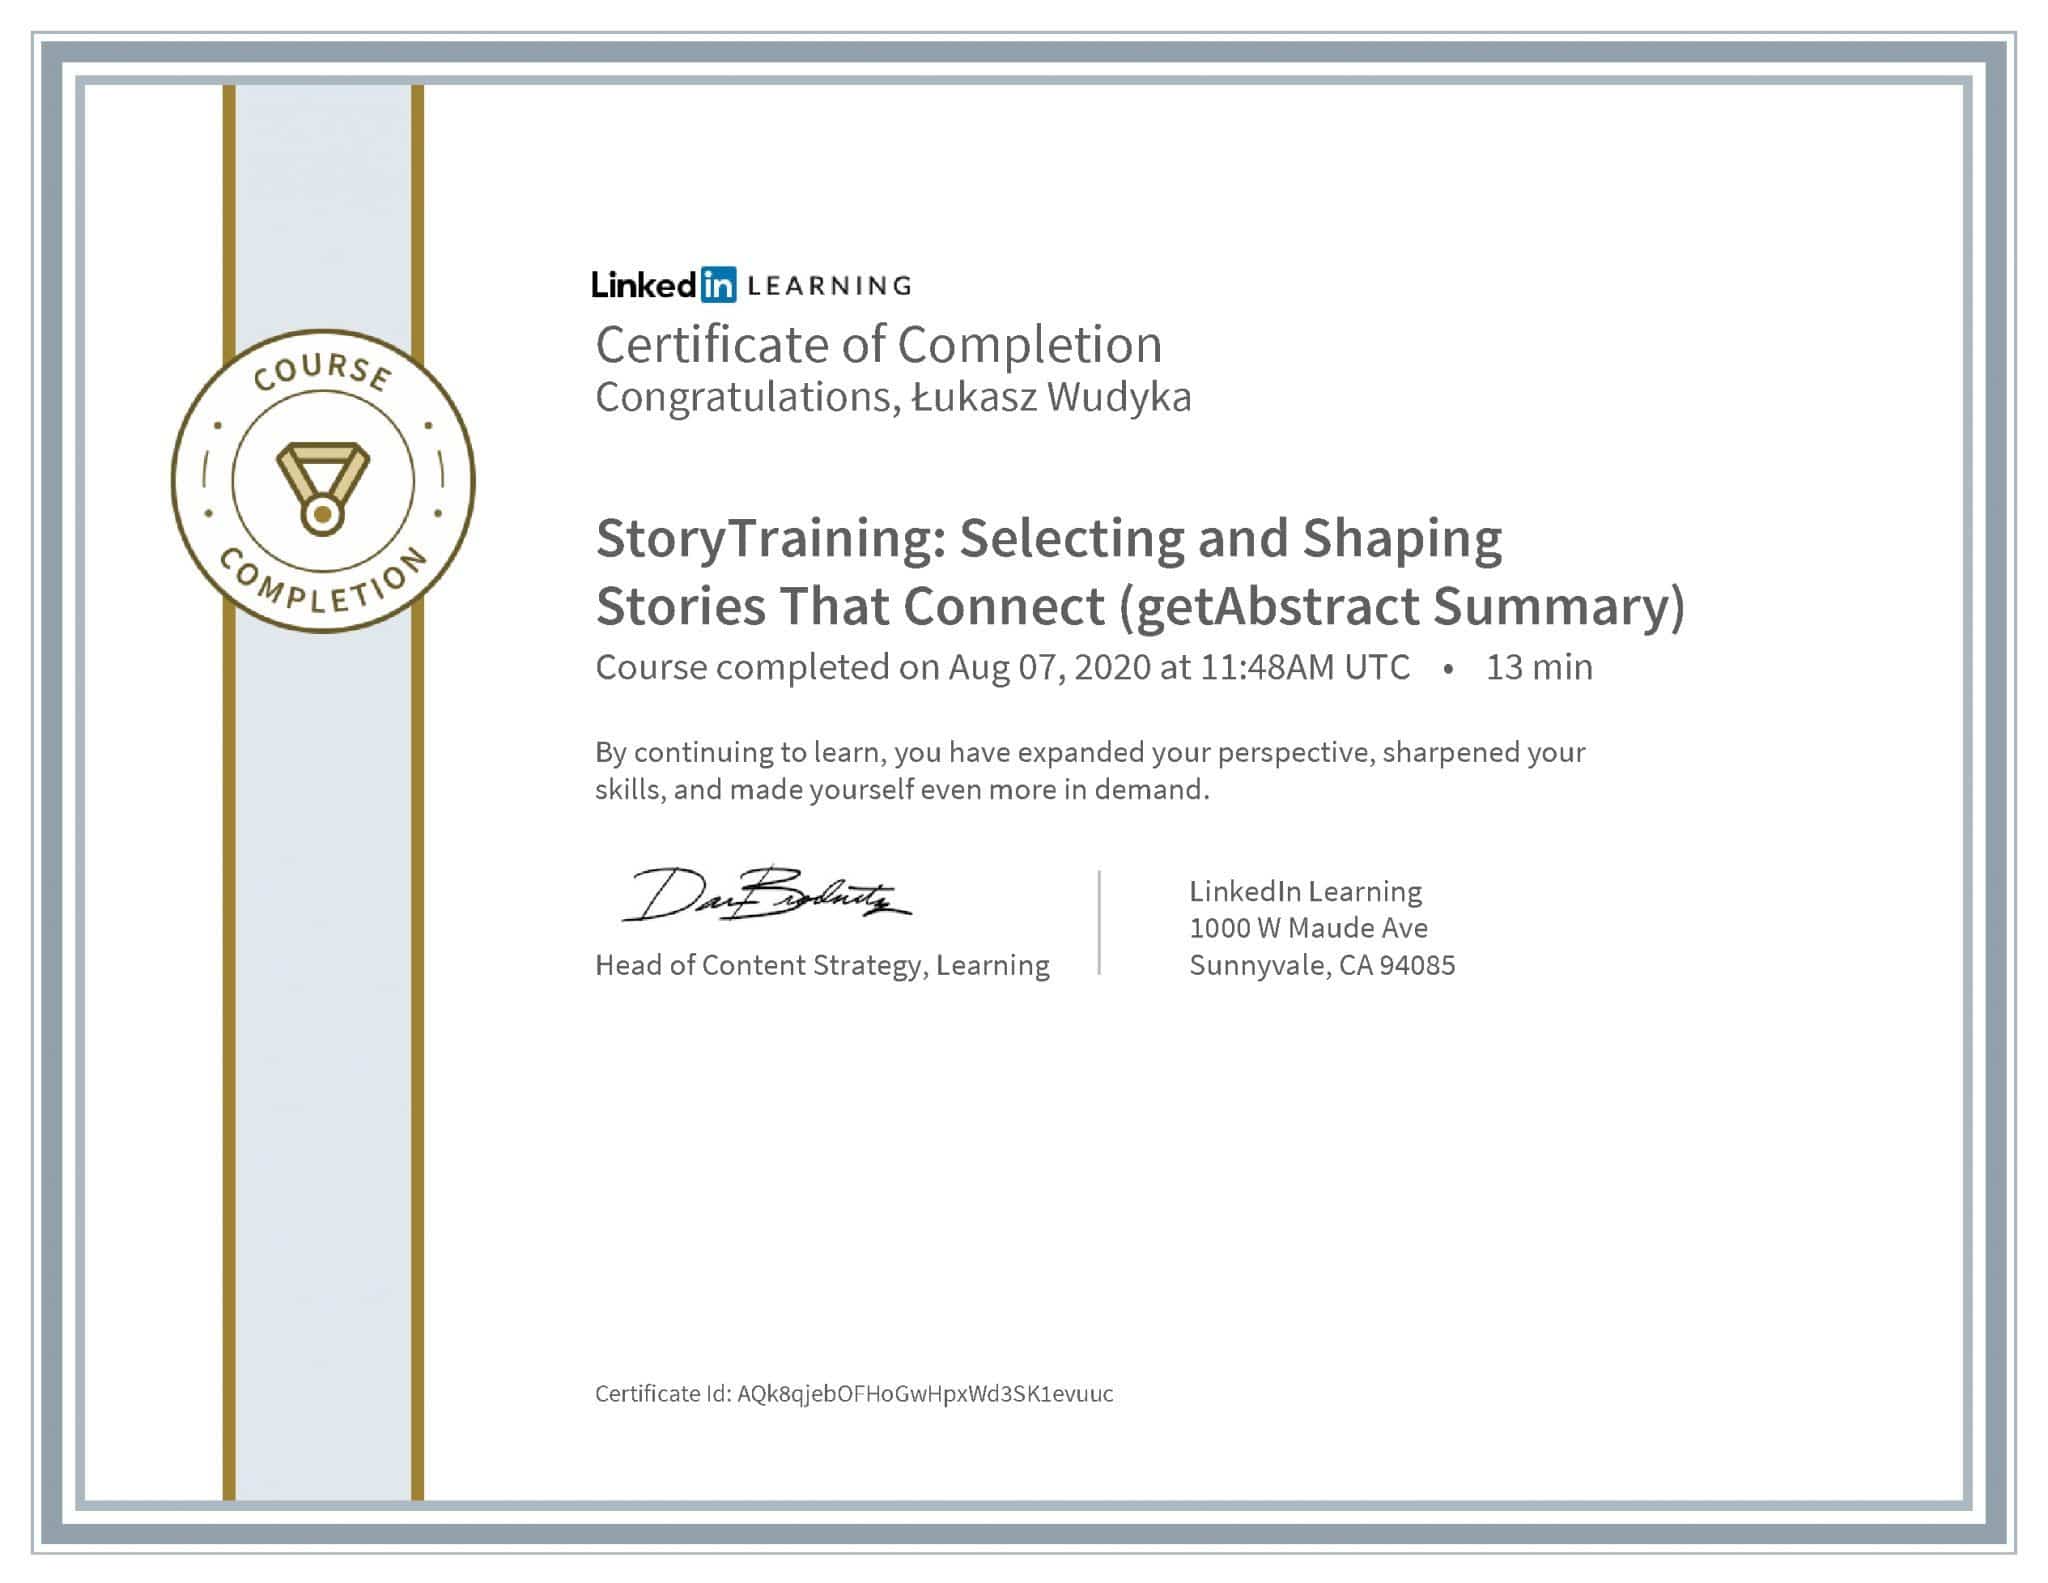 Łukasz Wudyka certyfikat LinkedIn StoryTraining: Selecting and Shaping Stories That Connect (getAbstract Summary)